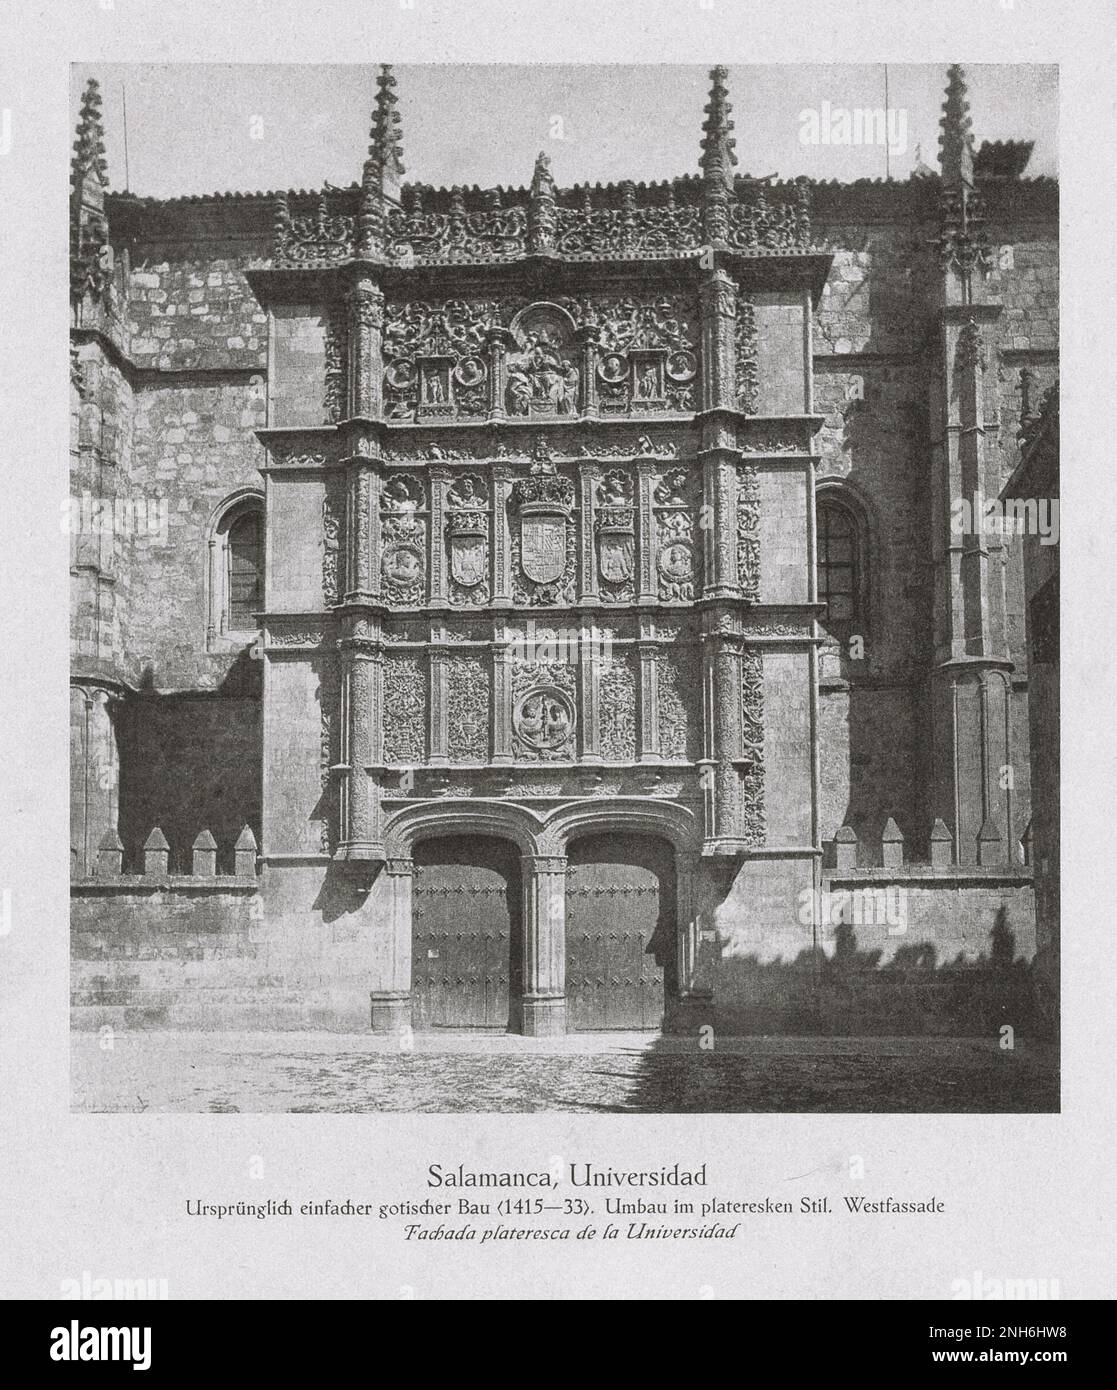 Architecture of Old Spain. Vintage photo of University of Salamanca (Universidad de Salamanca). Castile and León, Spain Originally a simple Gothic building (1415-1433). Remodeling in Plateresque style. Westfassade It was founded in 1218 by King Alfonso IX. It is the oldest university in the Hispanic world and one of the oldest in the world in continuous operation. Stock Photo